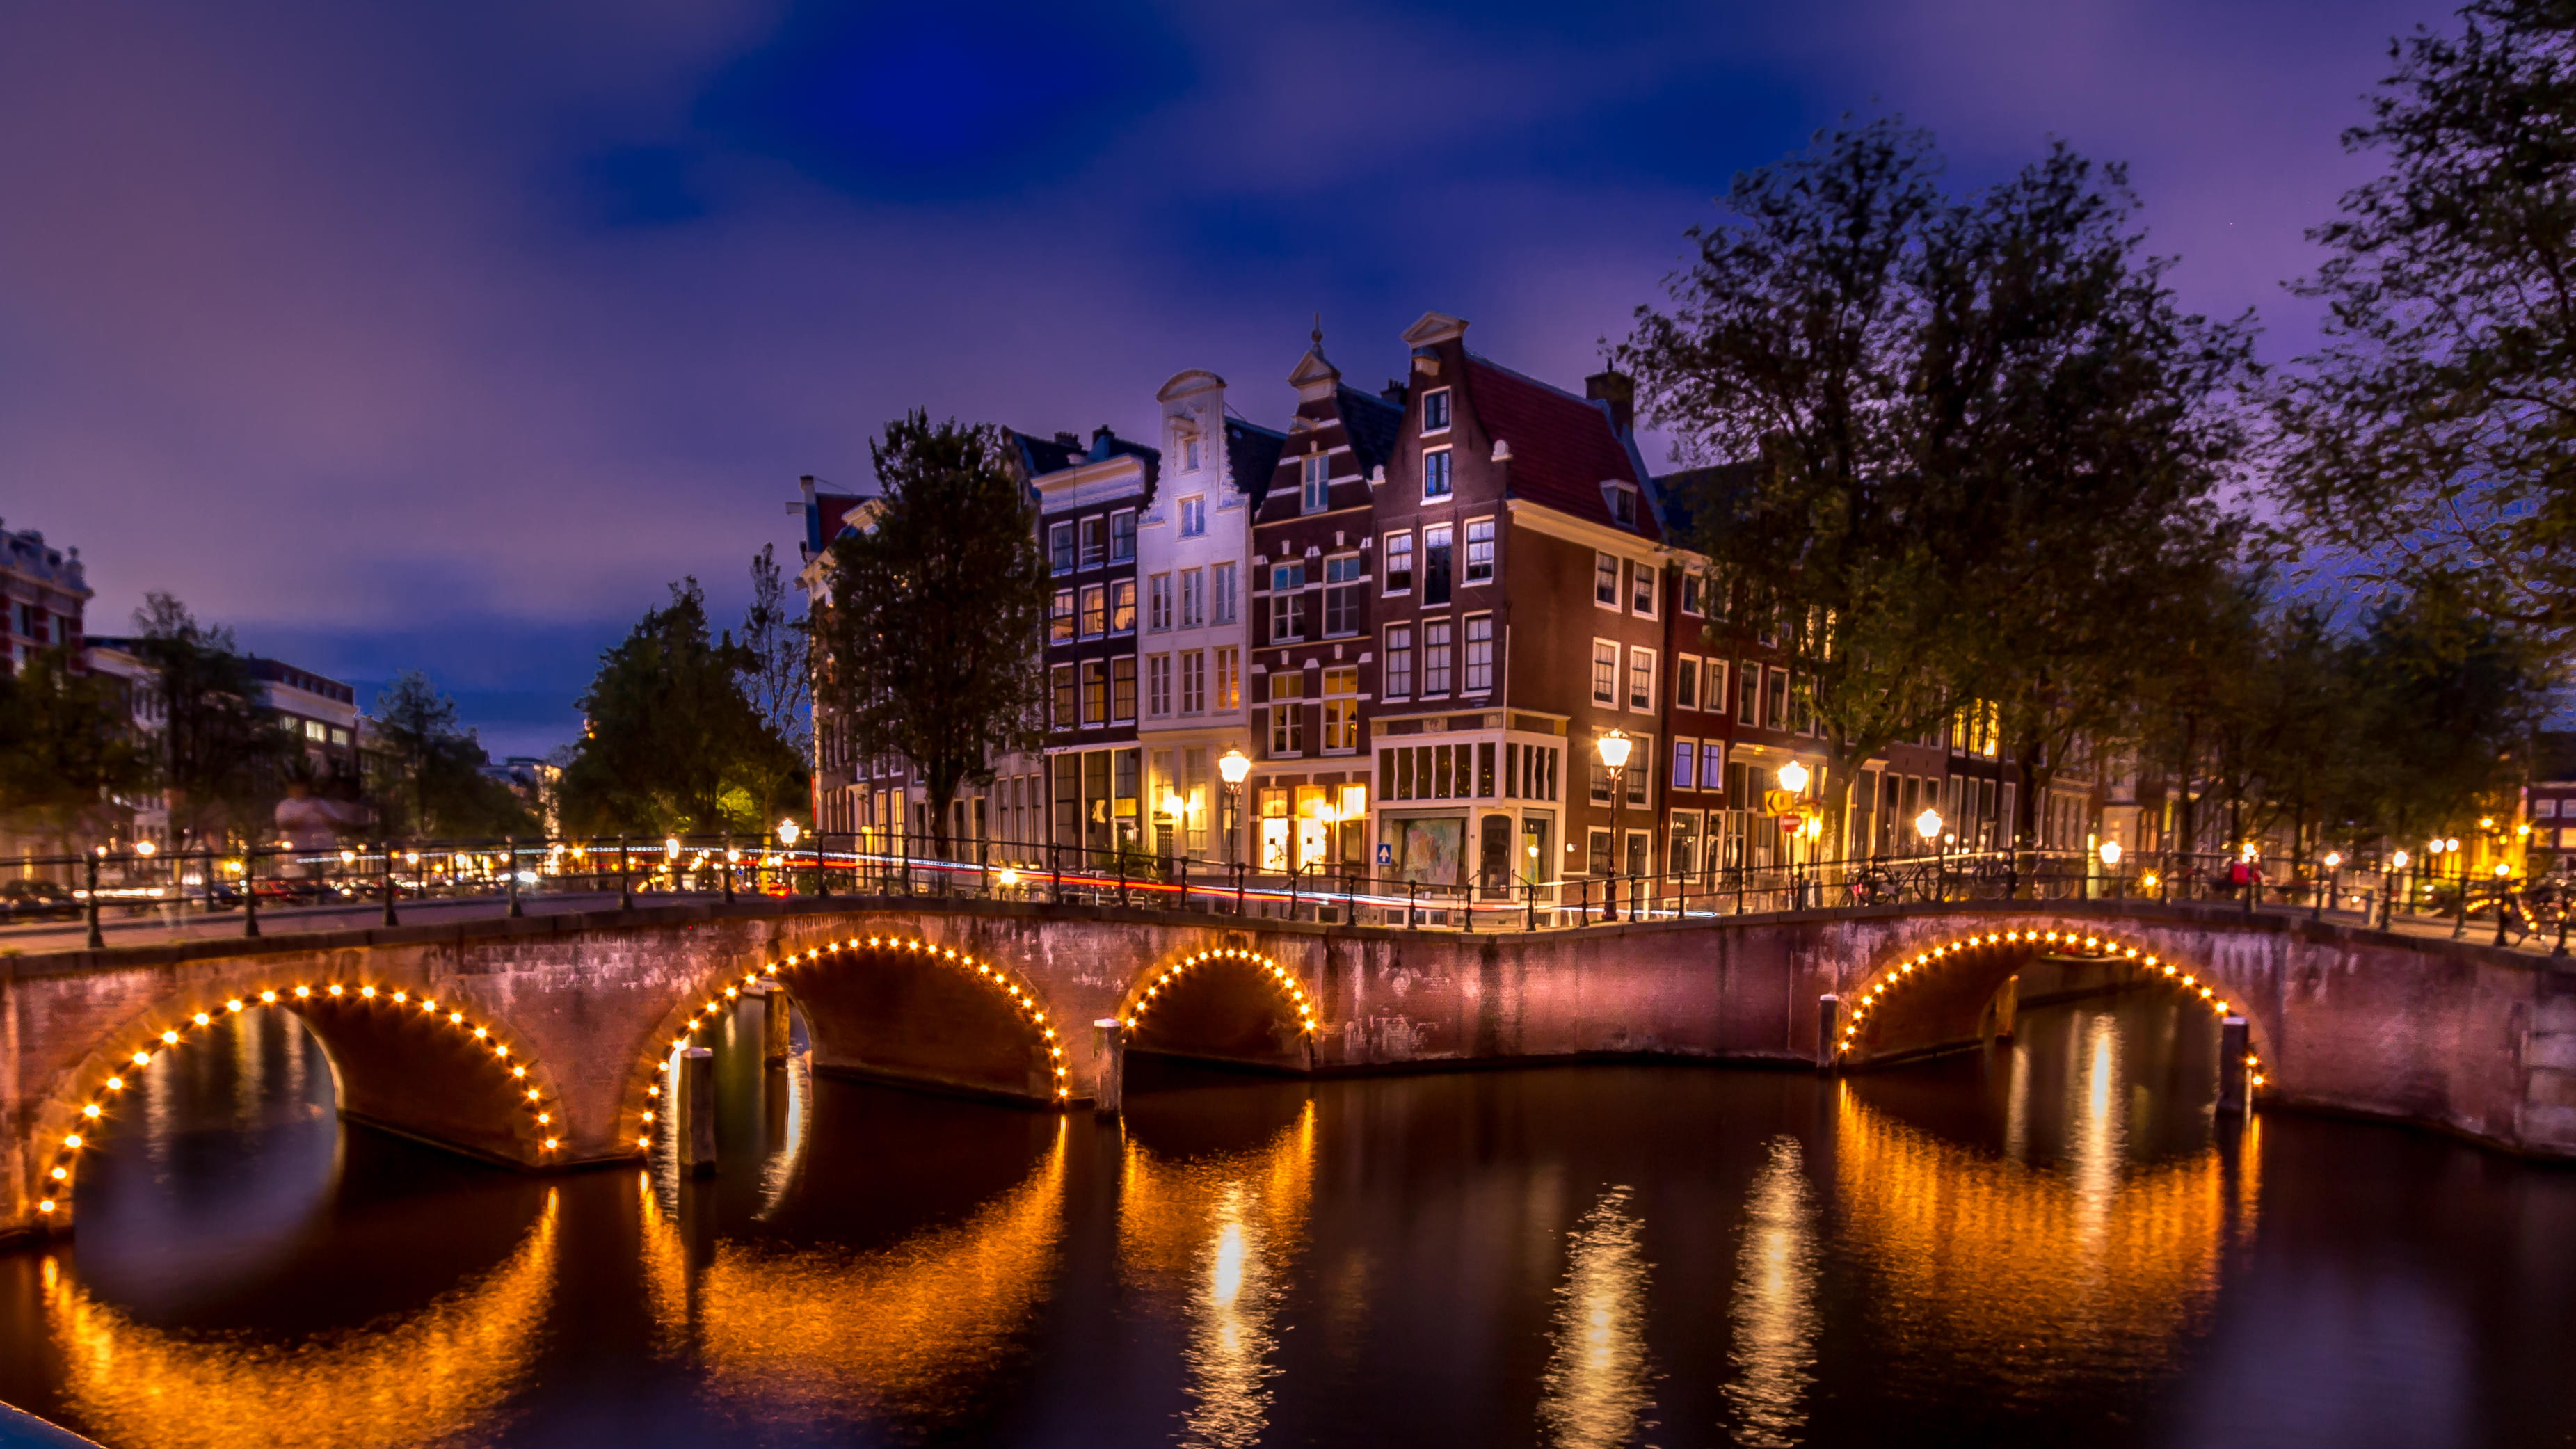 Amsterdam Canal at Night